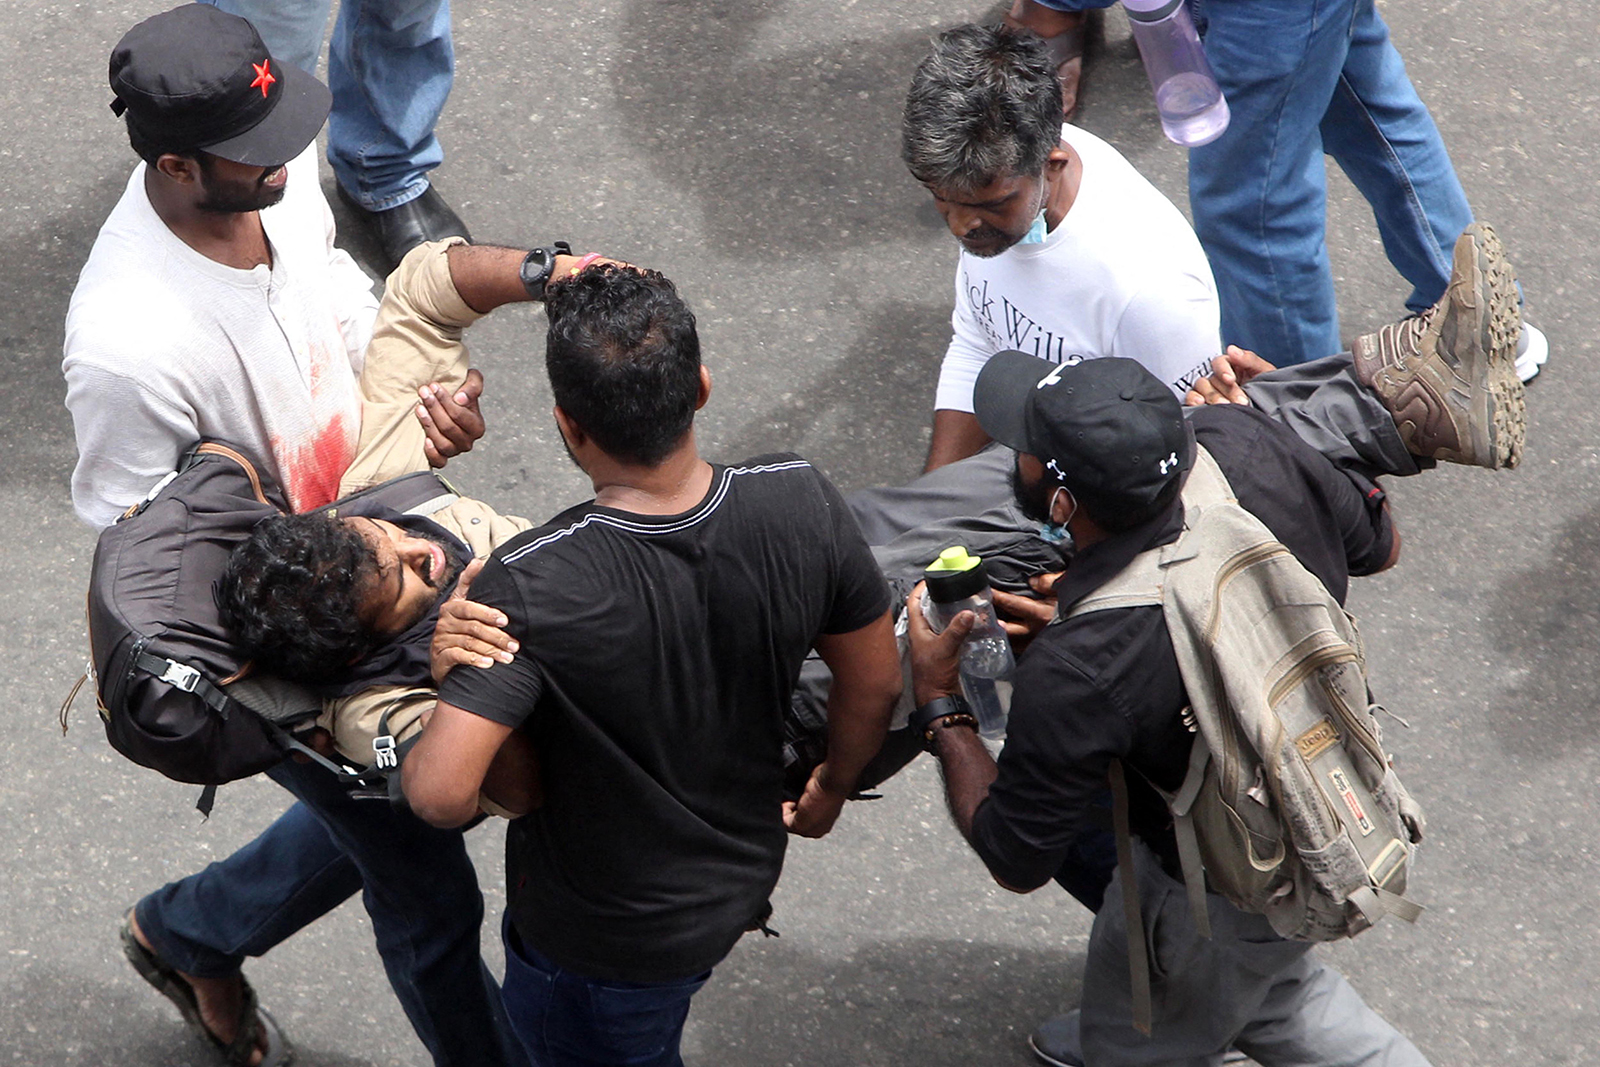 Protesters carry an injured man in Colombo on July 9.